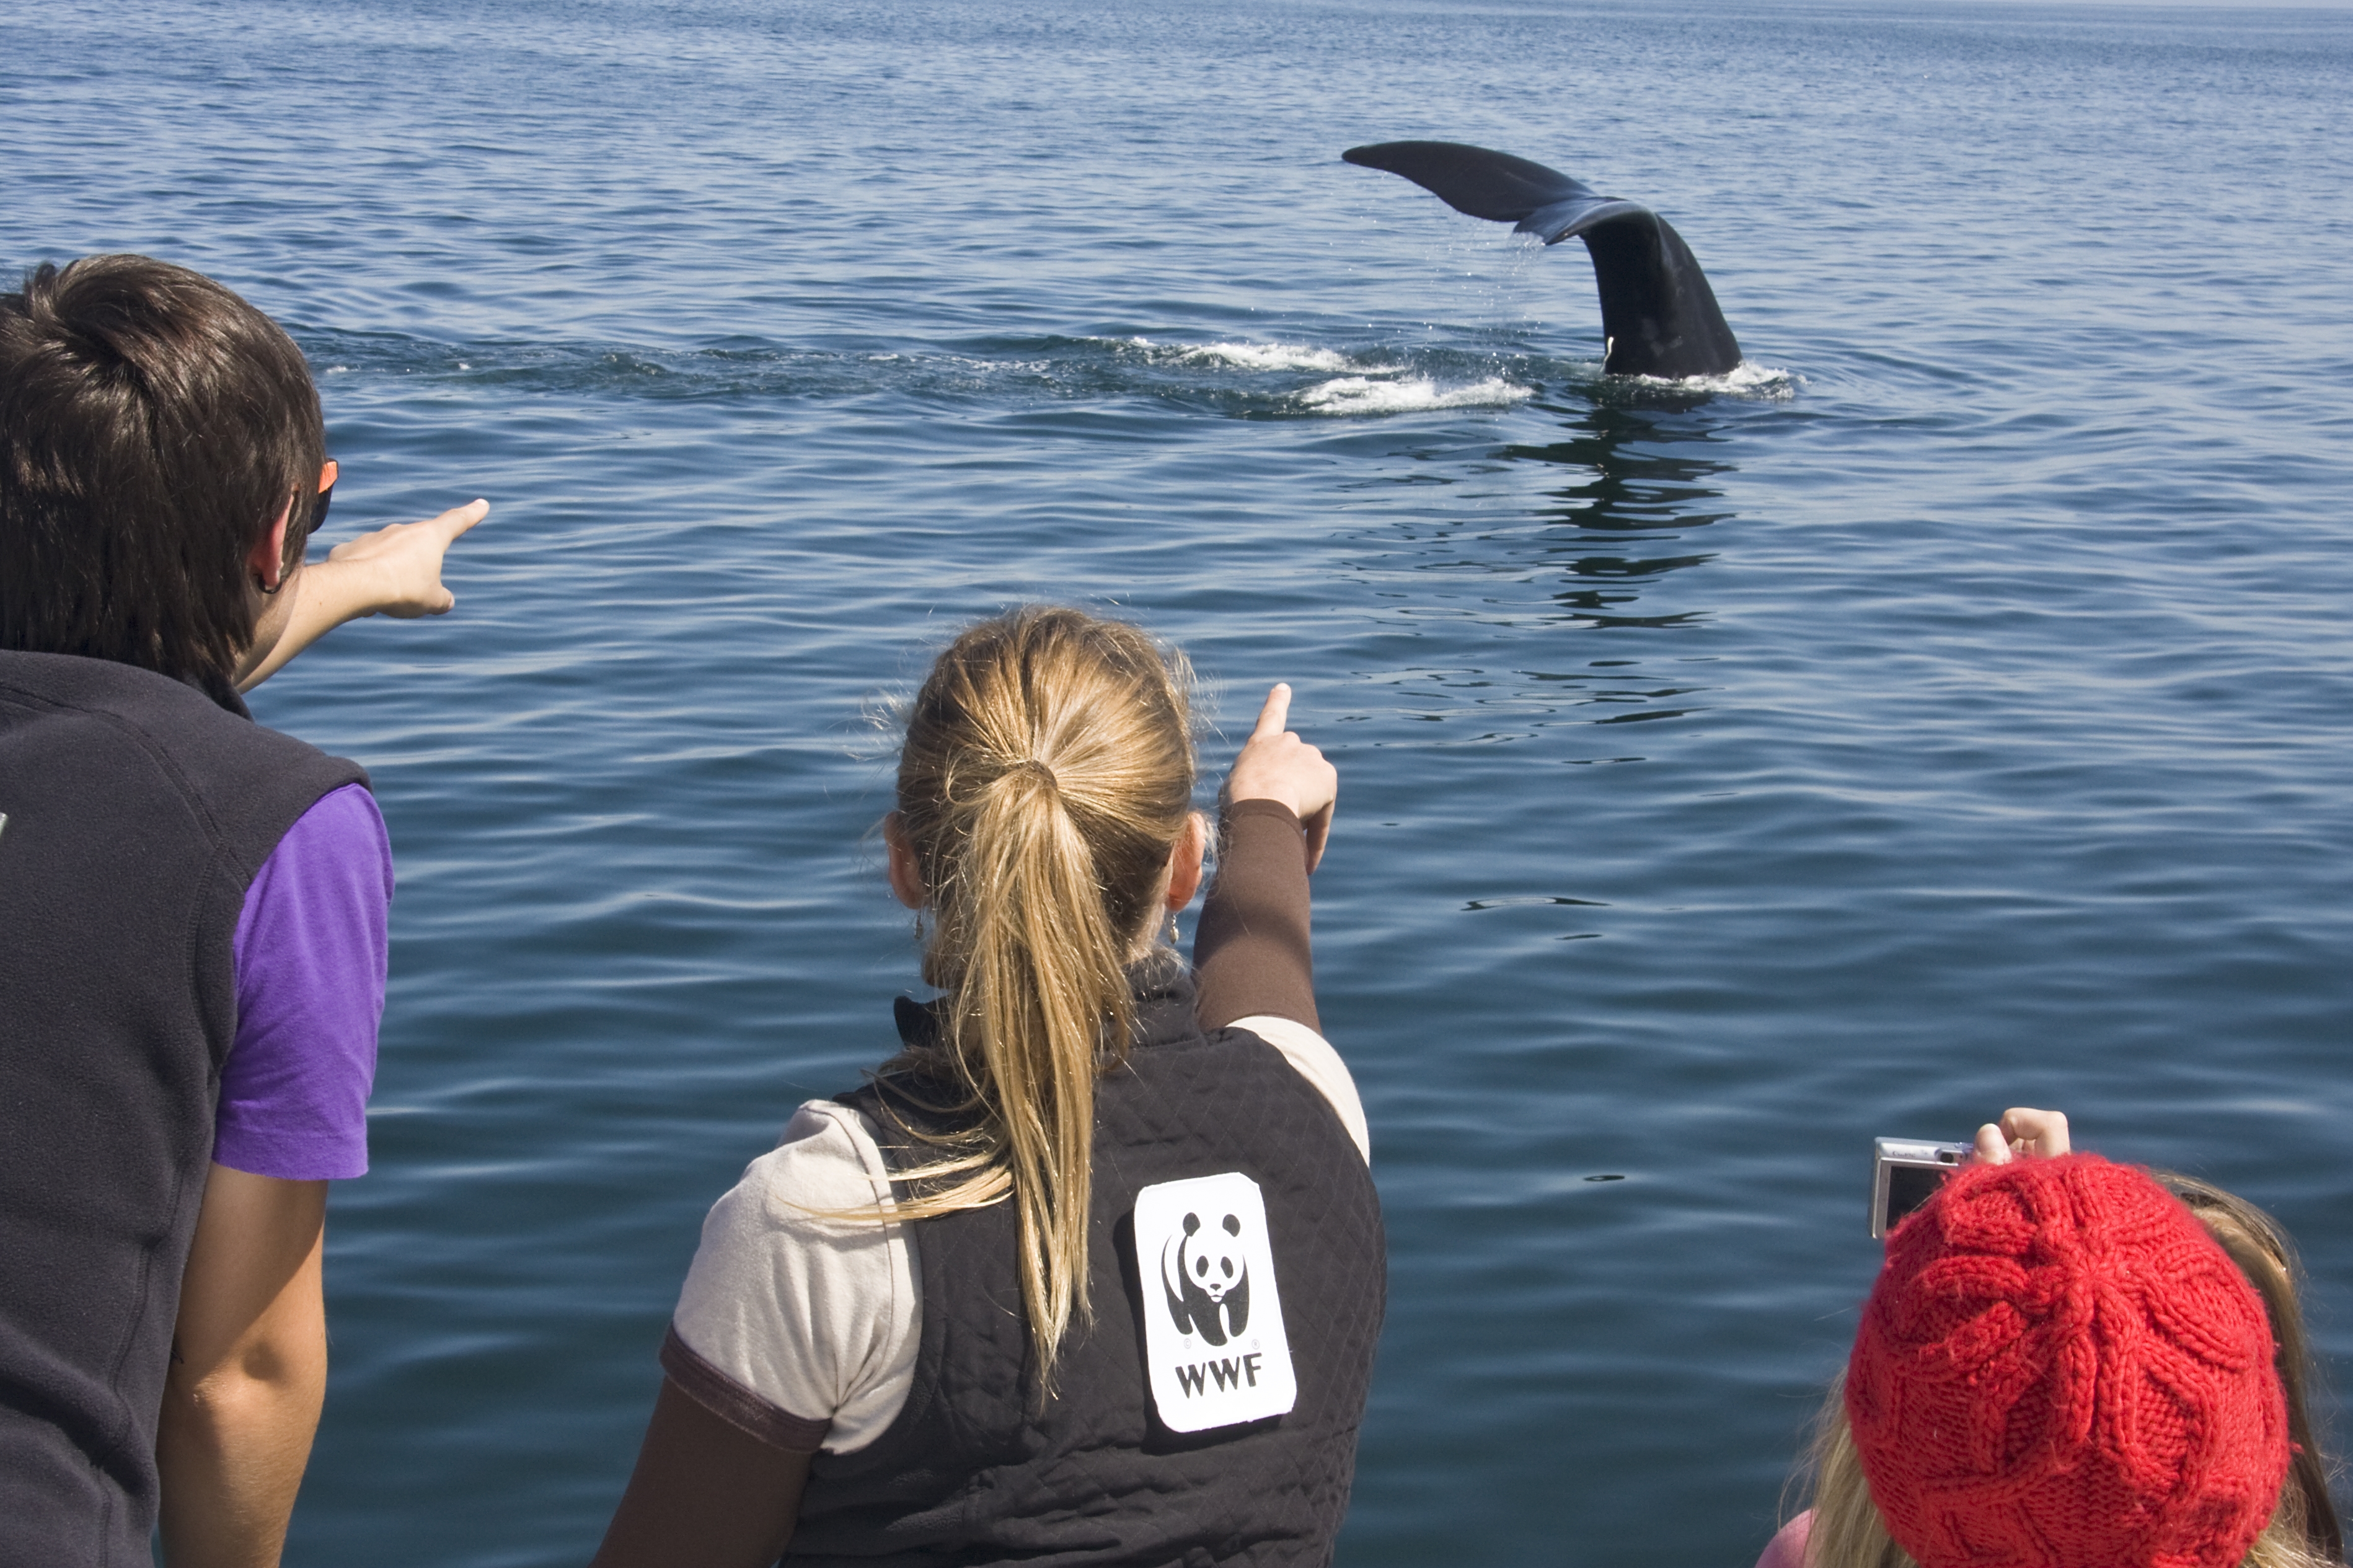 Spotting a North Atlantic right whale in the Bay of Fundy, Nova Scotia, Canada.